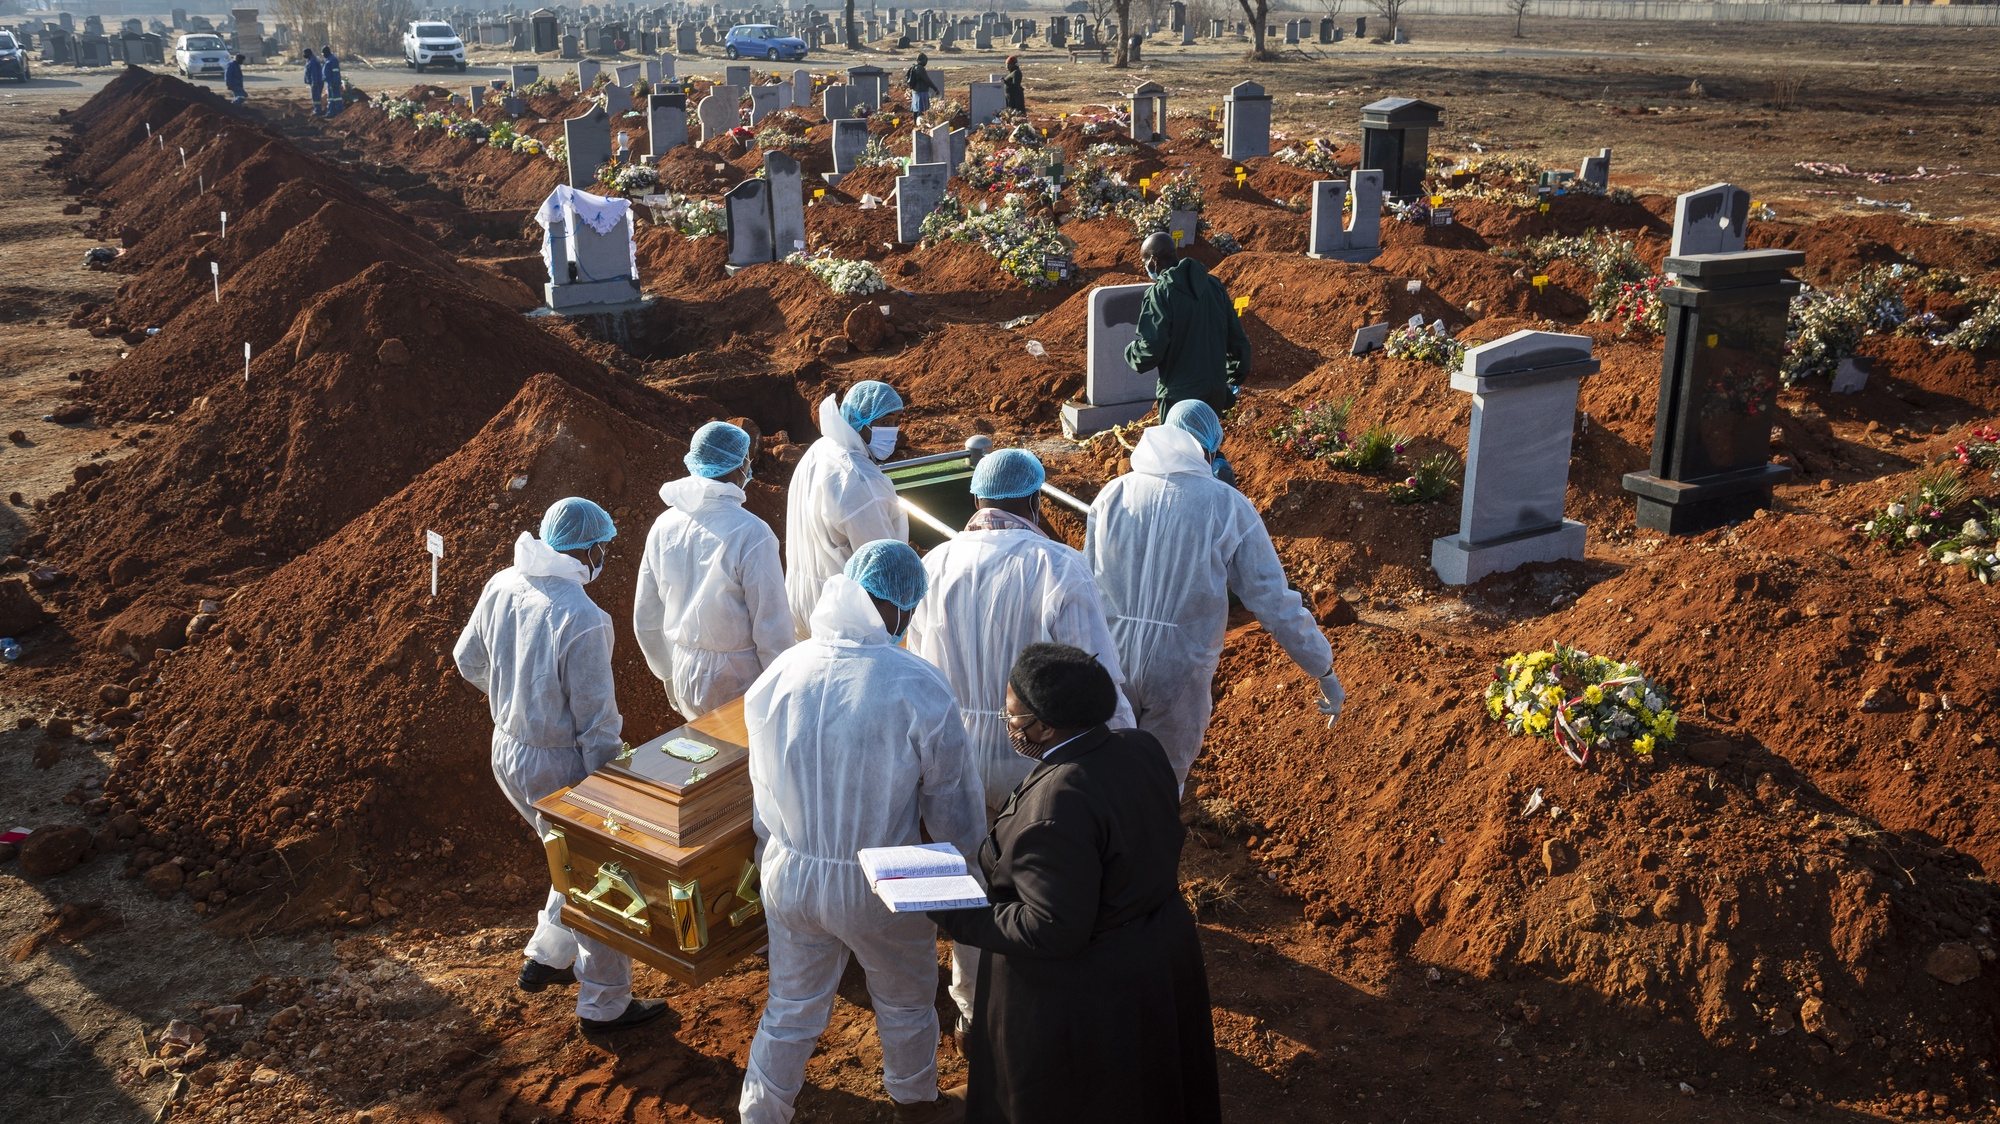 epa08667919 The coffin of a victim of the Covid-19 Corona virus being taken to her grave by relatives at a burial ground in Johannesburg, South Africa, 24 July 2020 (reissued on 14 September 2020). The National Funeral Practitioners Association of SA (Nafupa) have threatened a 3-day strike starting on 14 September after the government tightened legislation regarding undertakers working conditions. The strike would mean bodies of deceased would not be collected from old age homes, hospitals and morgues for three days, that might lead to possible heath issues.  EPA/KIM LUDBROOK